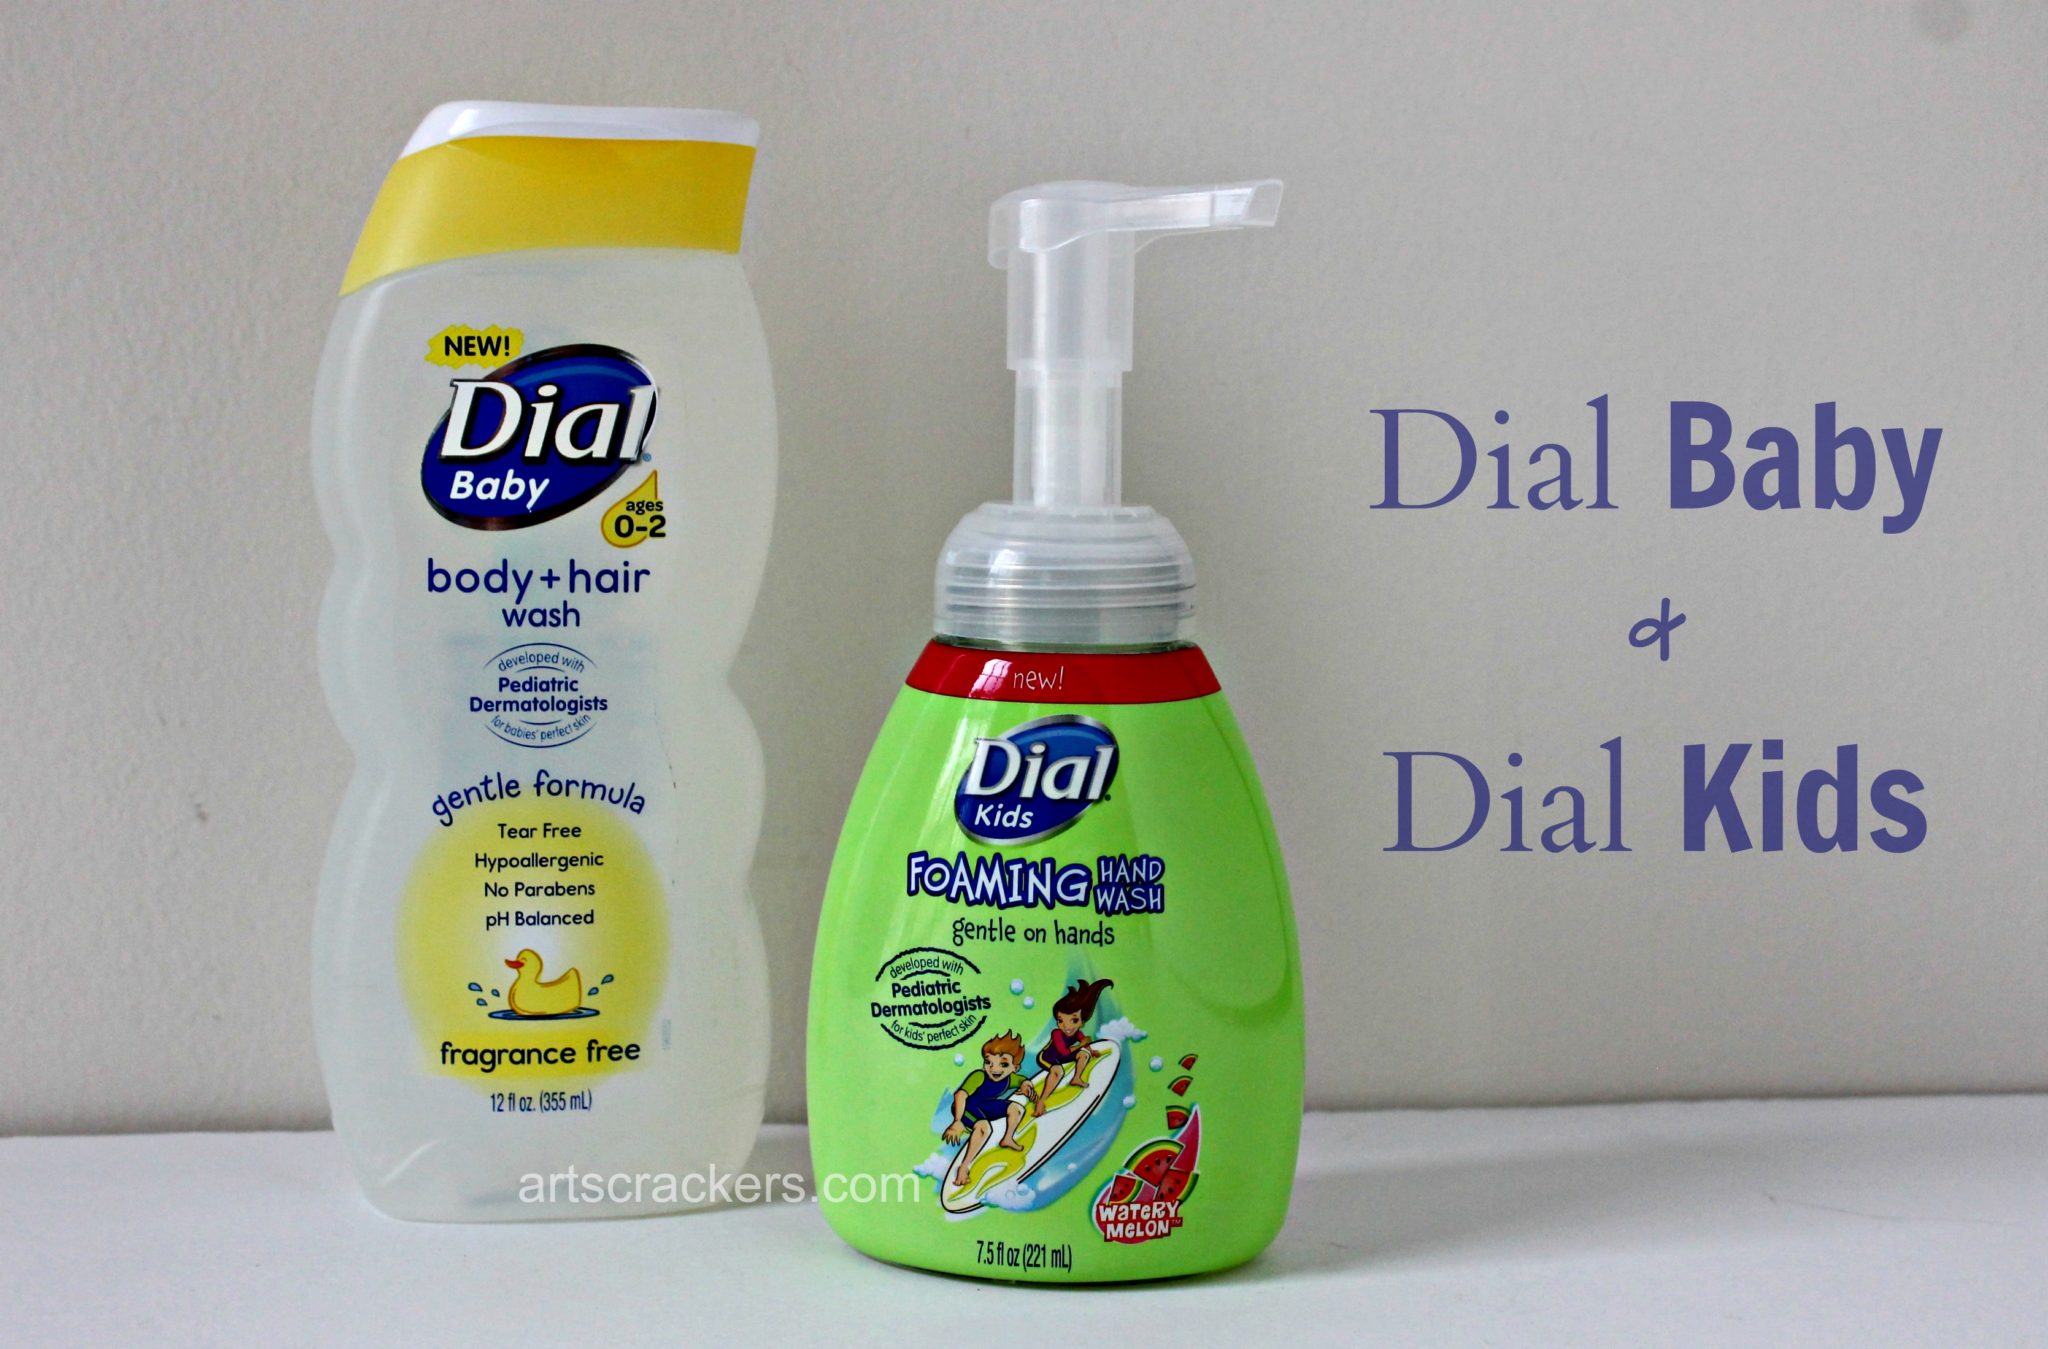 Dial Baby and Dial Kids Products. Click the picture for the review and giveaway.